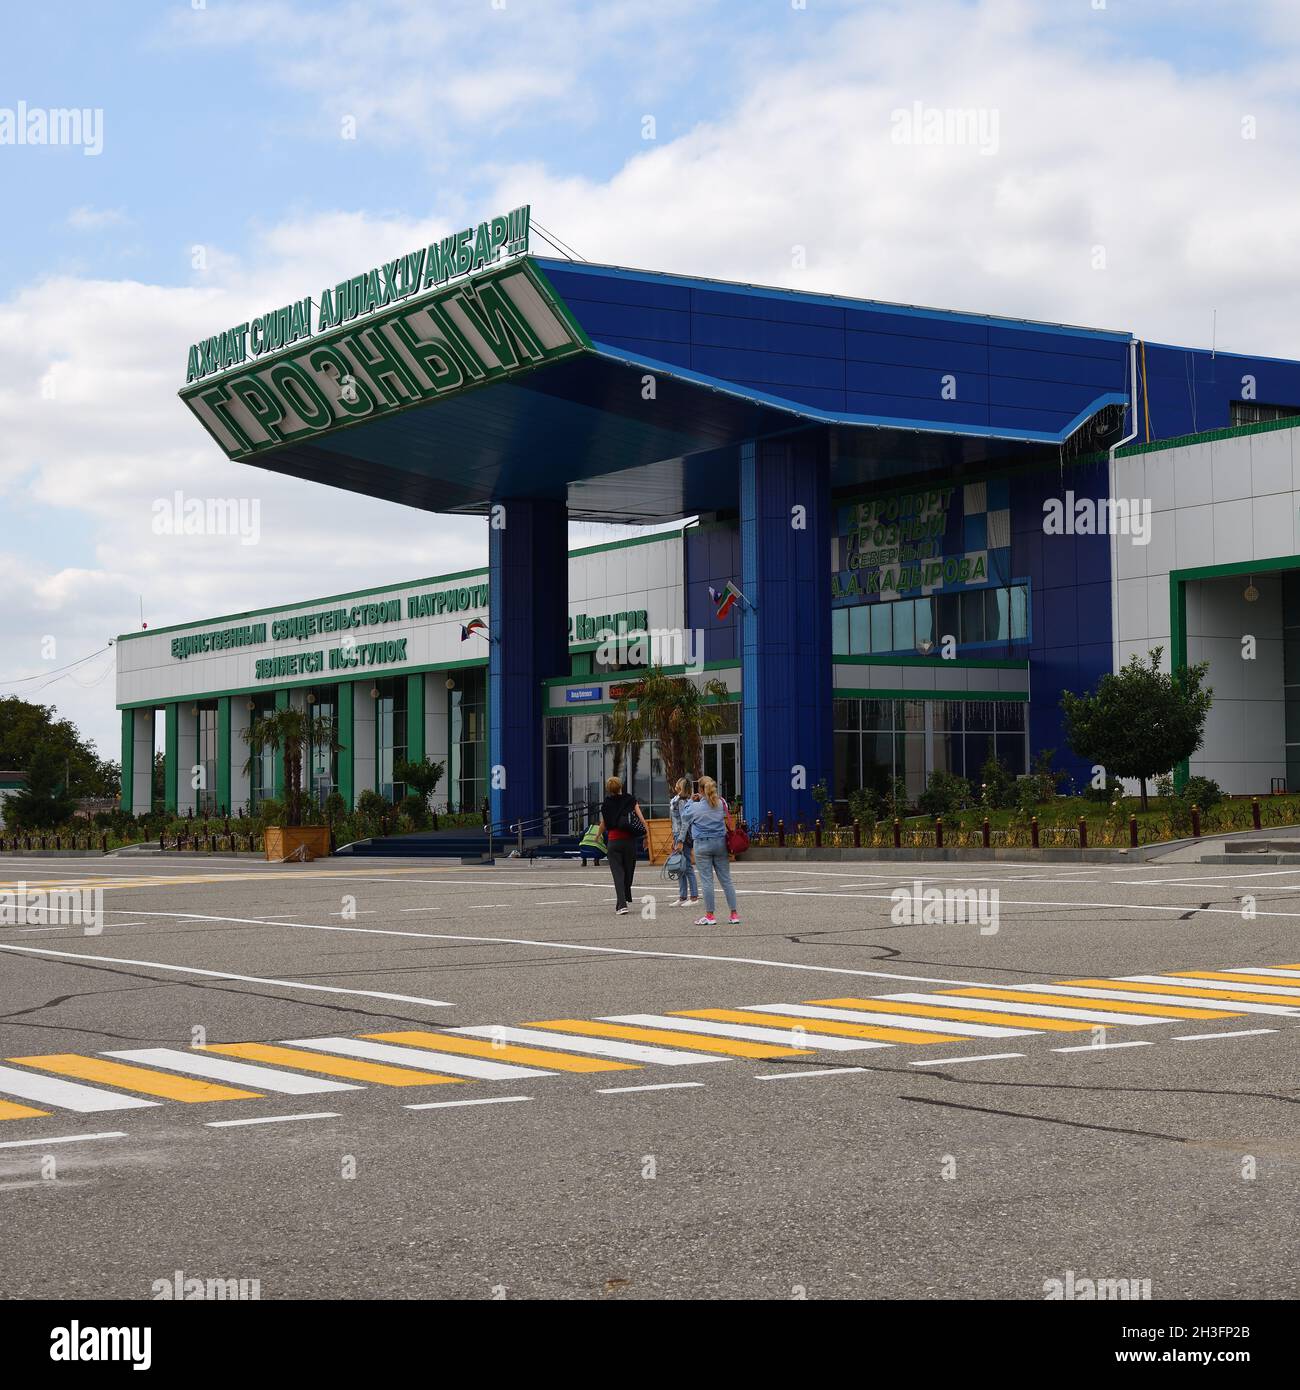 Grozny, Russia - Sept 13, 2021: International airport 'Grozny' Nord, located near the city of Grozny, Chechen Republic,  Russian Federation Stock Photo